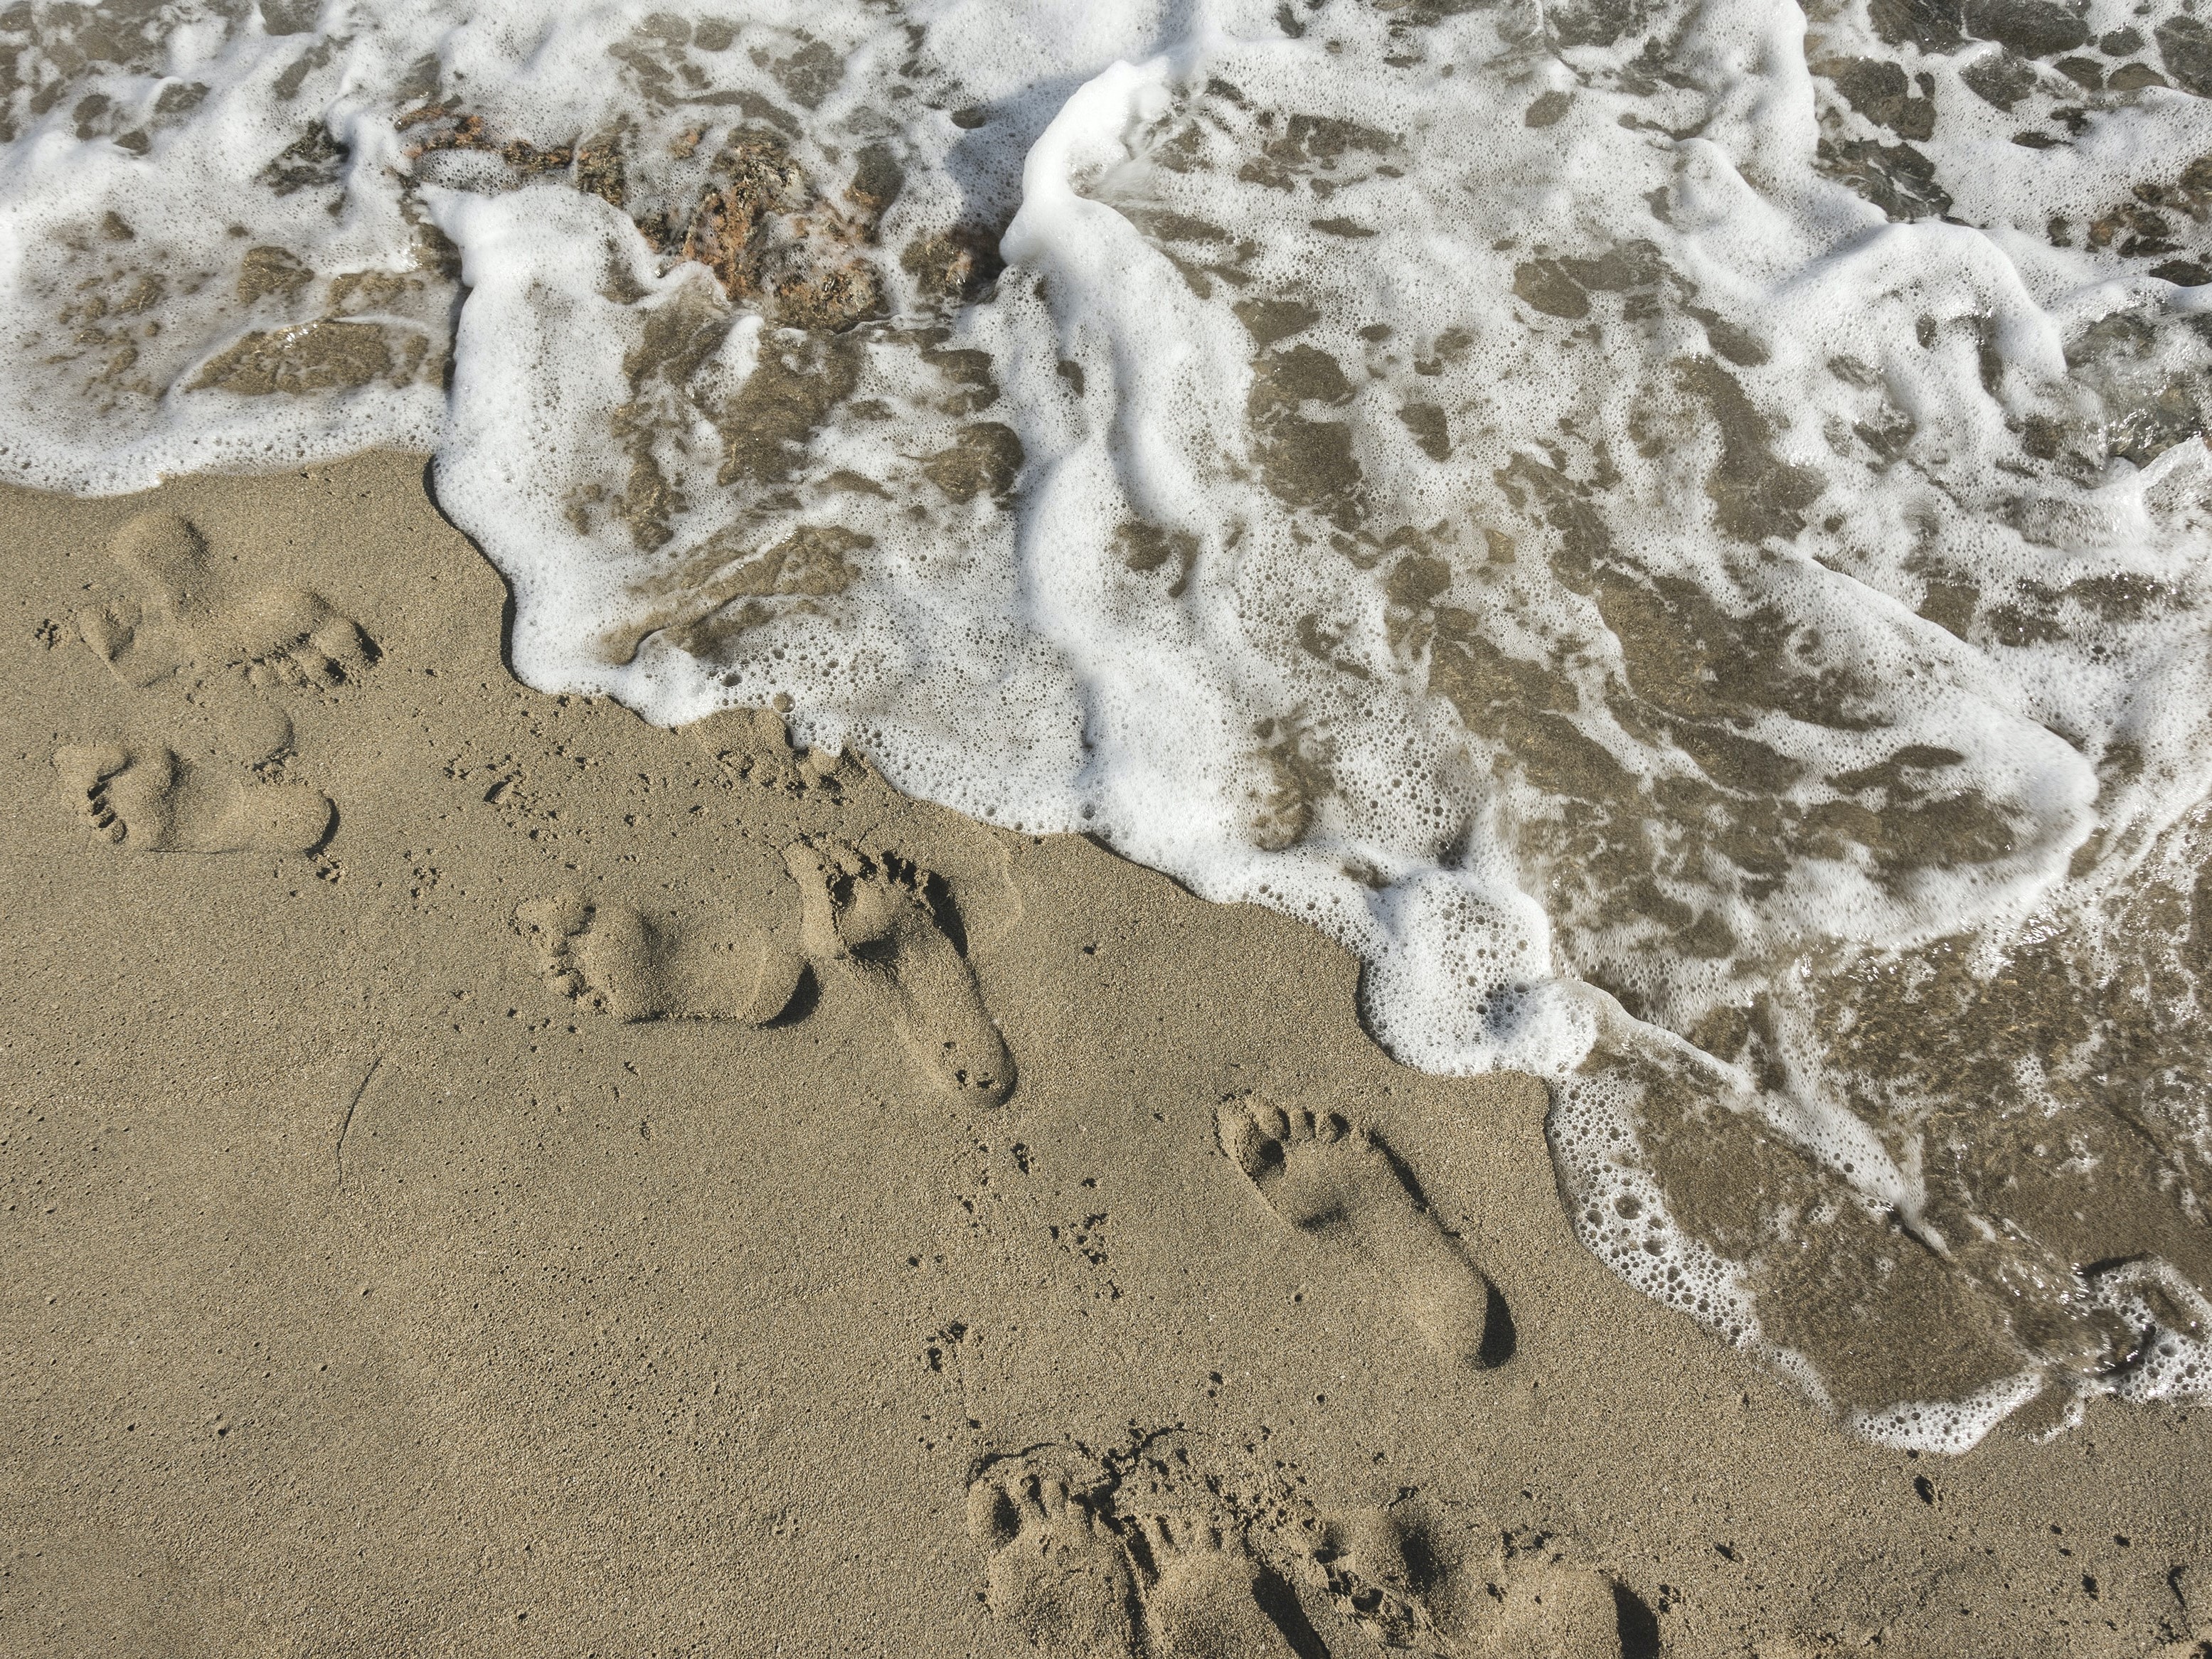 Footprints in the sand by tide